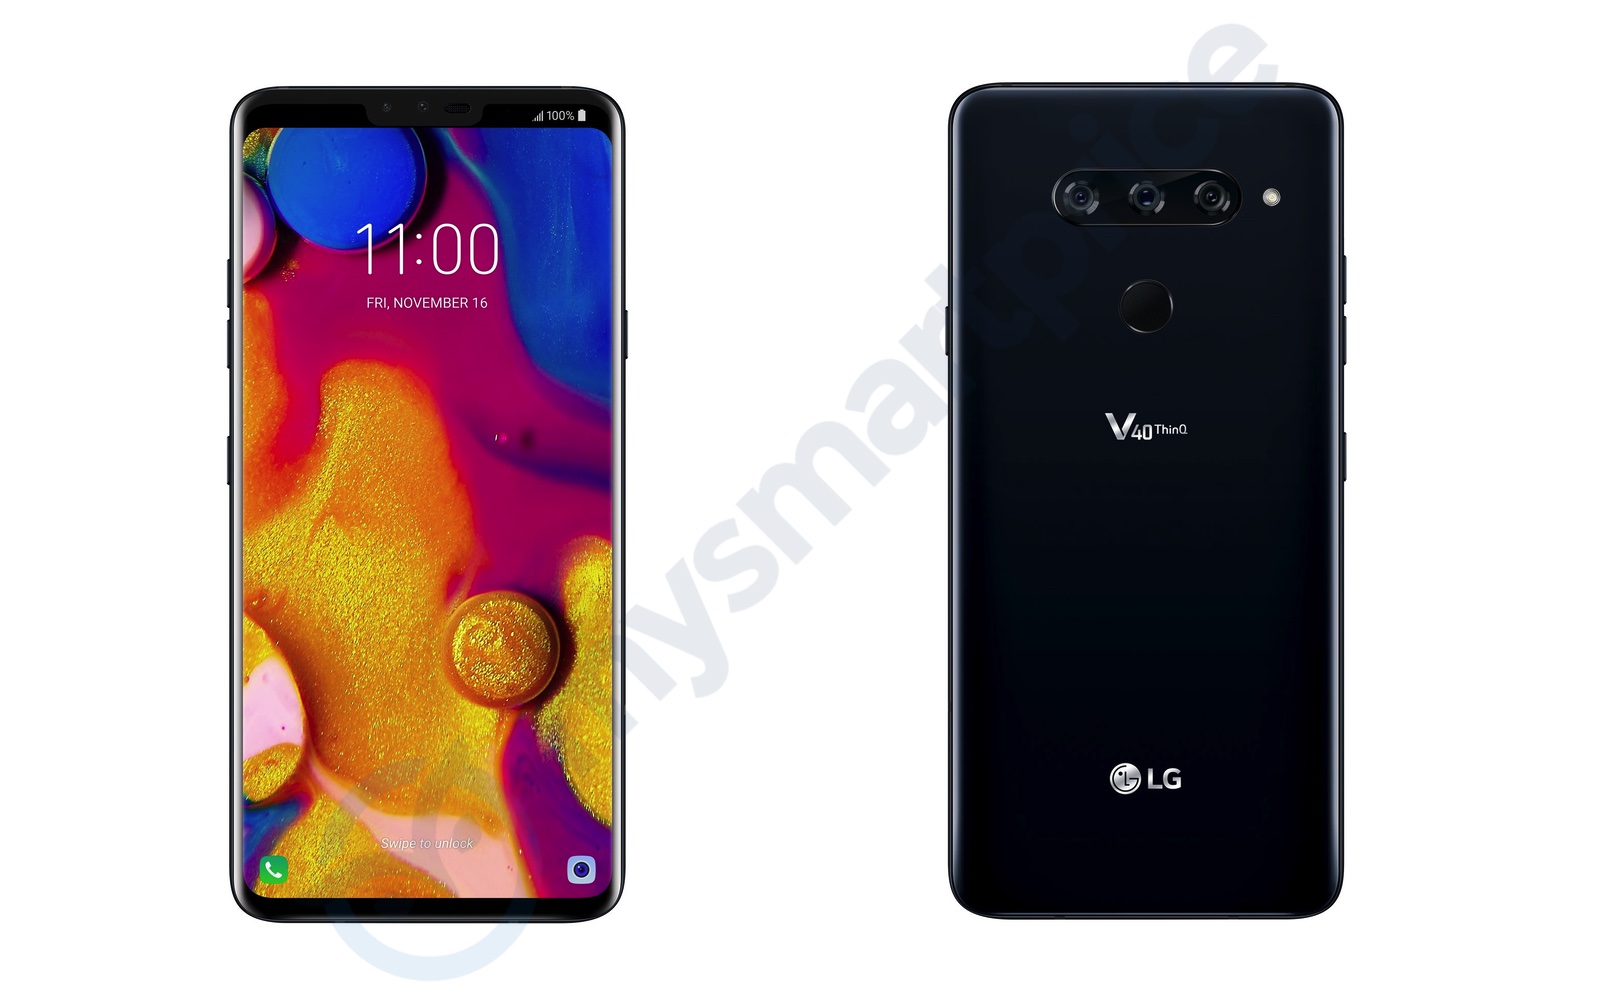 Leaked press renders of the LG V40 ThinQ.